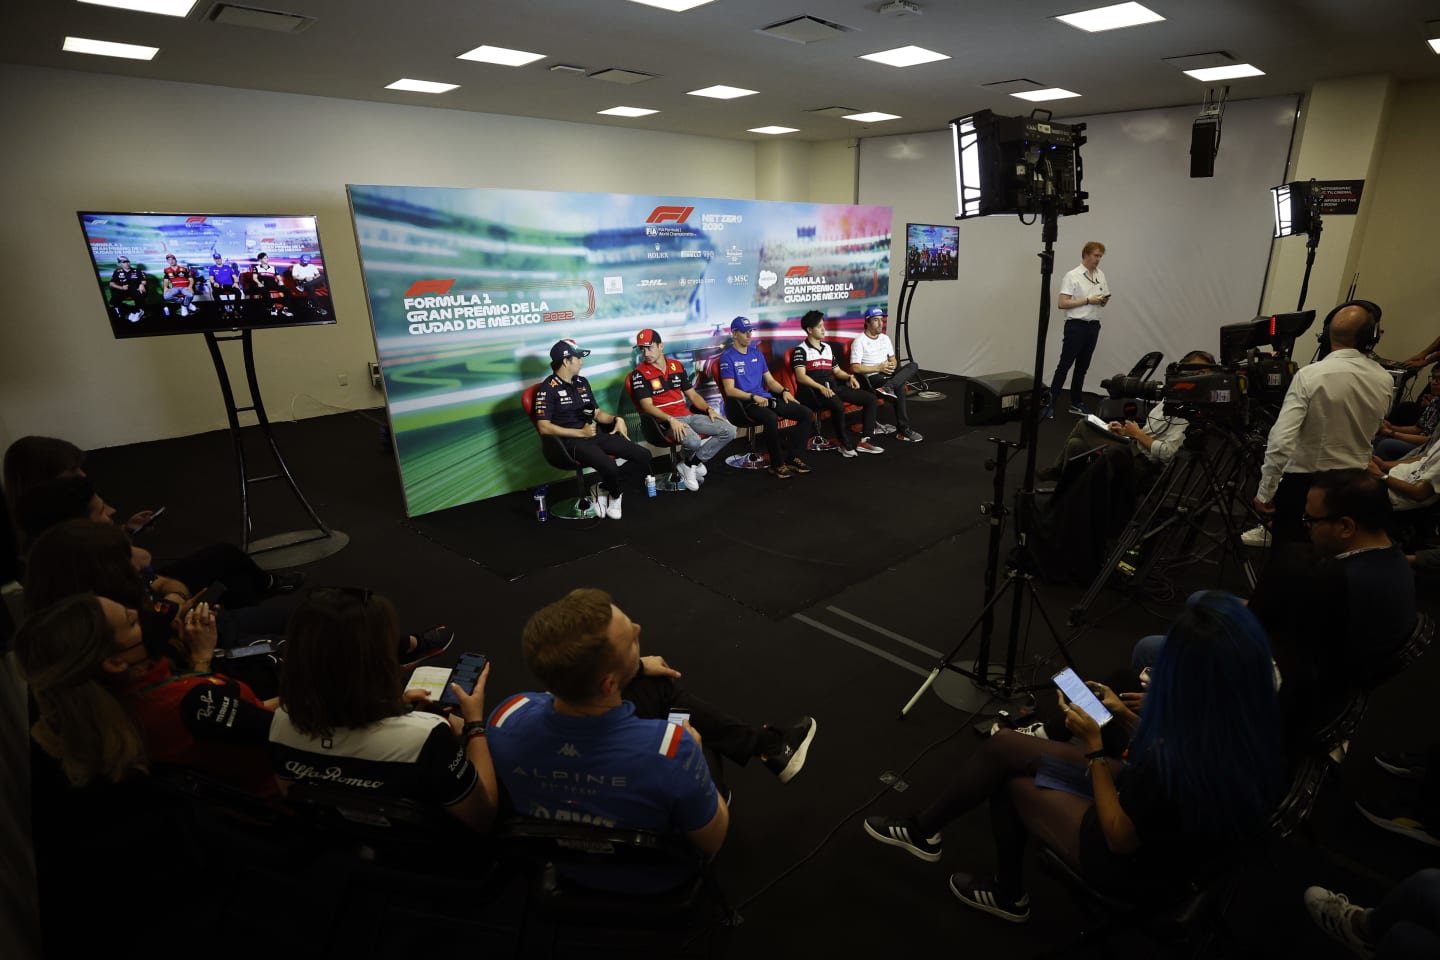 MEXICO CITY, MEXICO - OCTOBER 27: (L-R) Sergio Perez of Mexico and Oracle Red Bull Racing, Charles Leclerc of Monaco and Ferrari, Mick Schumacher of Germany and Haas F1, Zhou Guanyu of China and Alfa Romeo F1 and Fernando Alonso of Spain and Alpine F1 attend the Drivers Press Conference  during previews ahead of the F1 Grand Prix of Mexico at Autodromo Hermanos Rodriguez on October 27, 2022 in Mexico City, Mexico. (Photo by Jared C. Tilton/Getty Images)